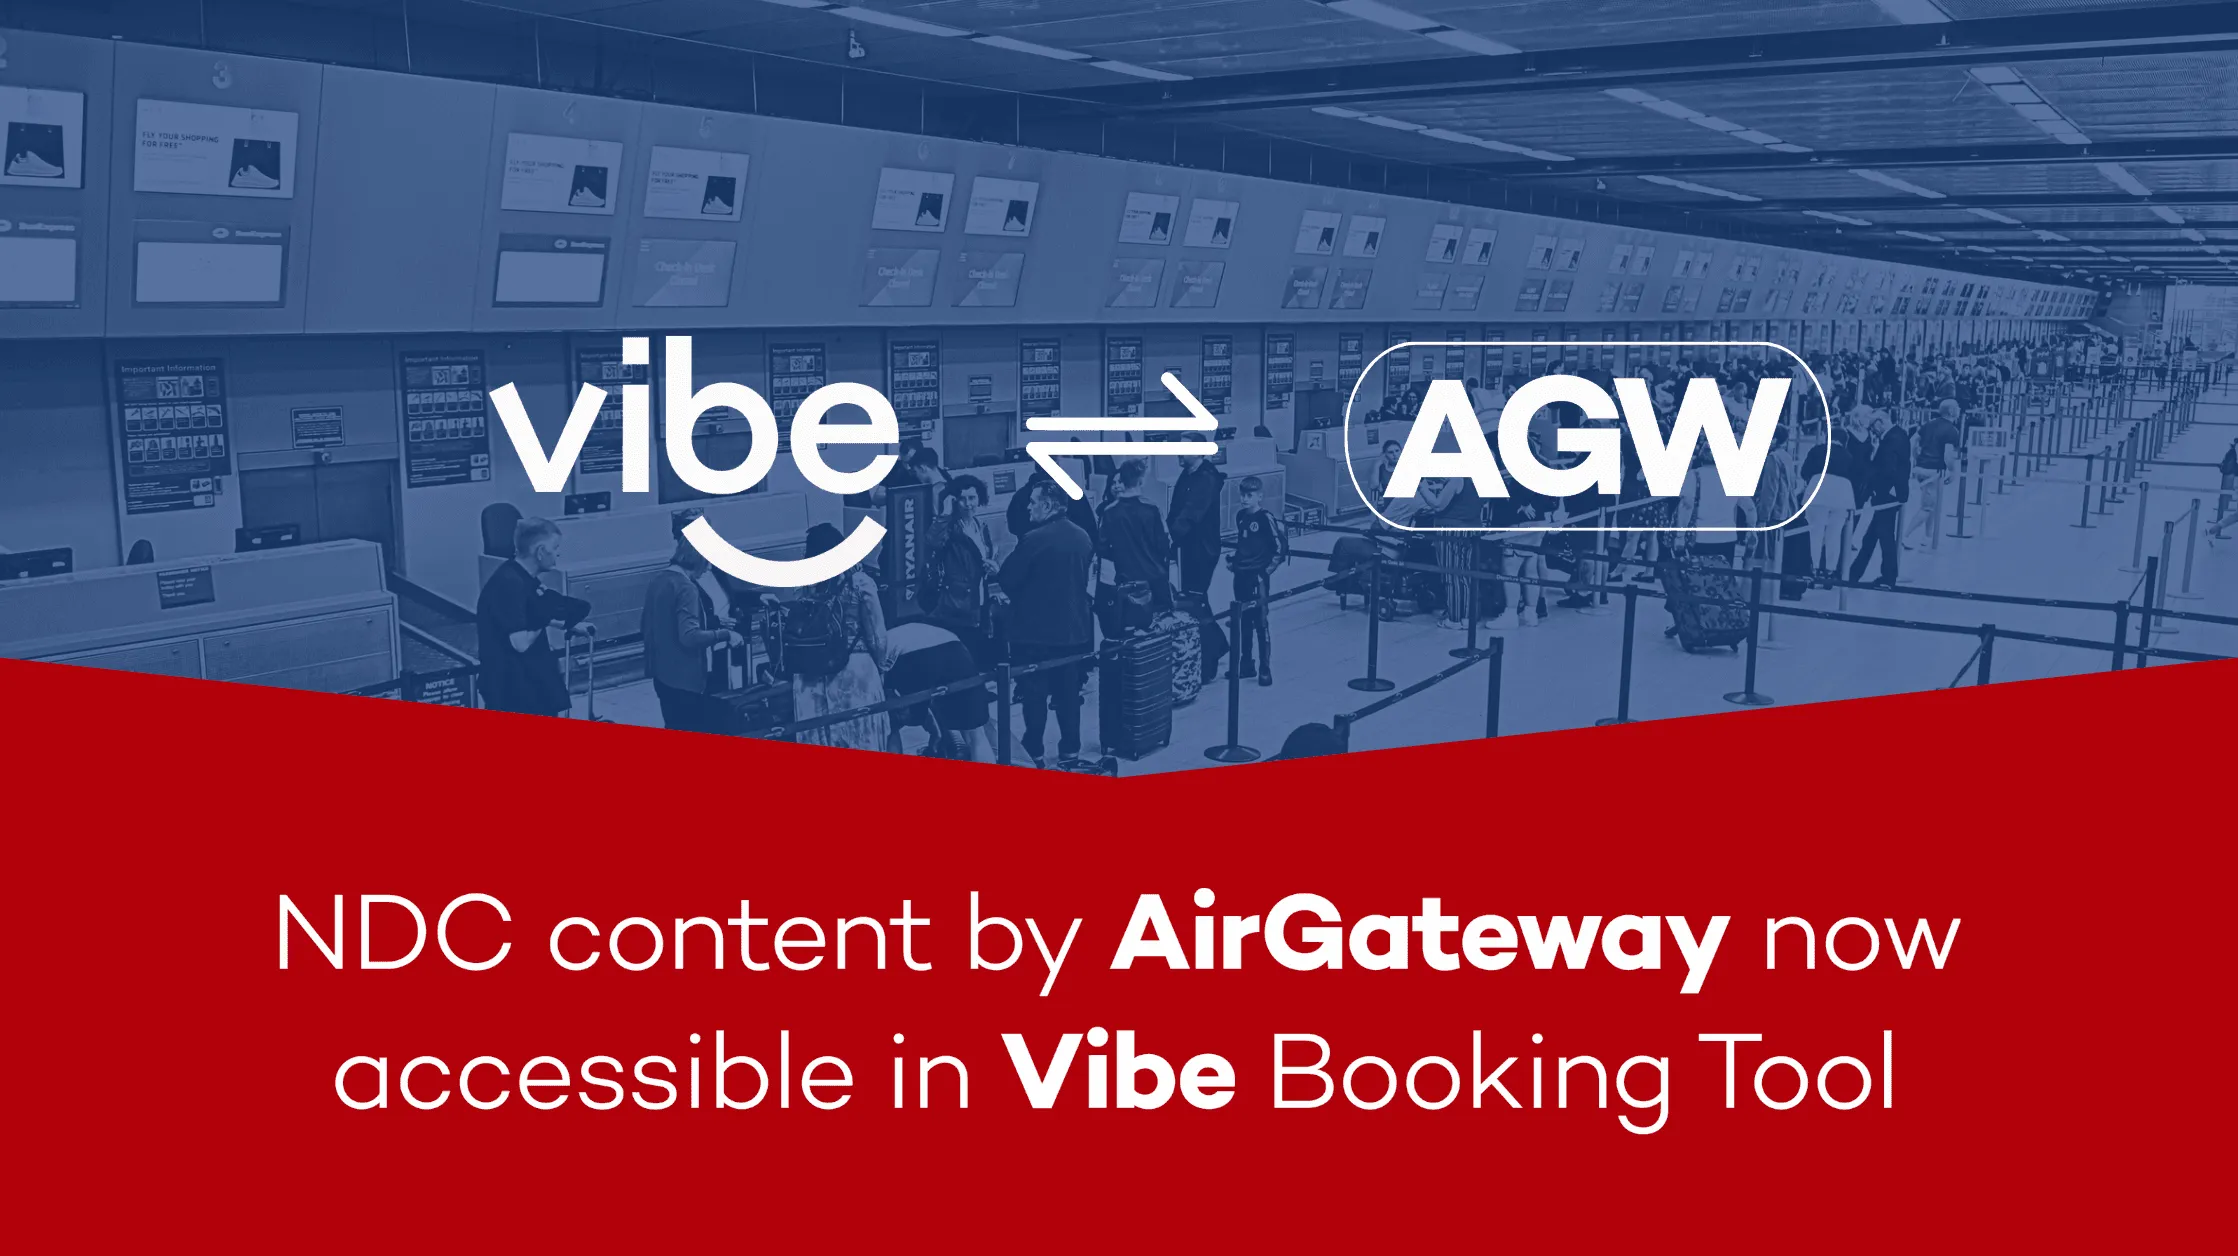 AirGateway partners with Vibe to tackle content fragmentation